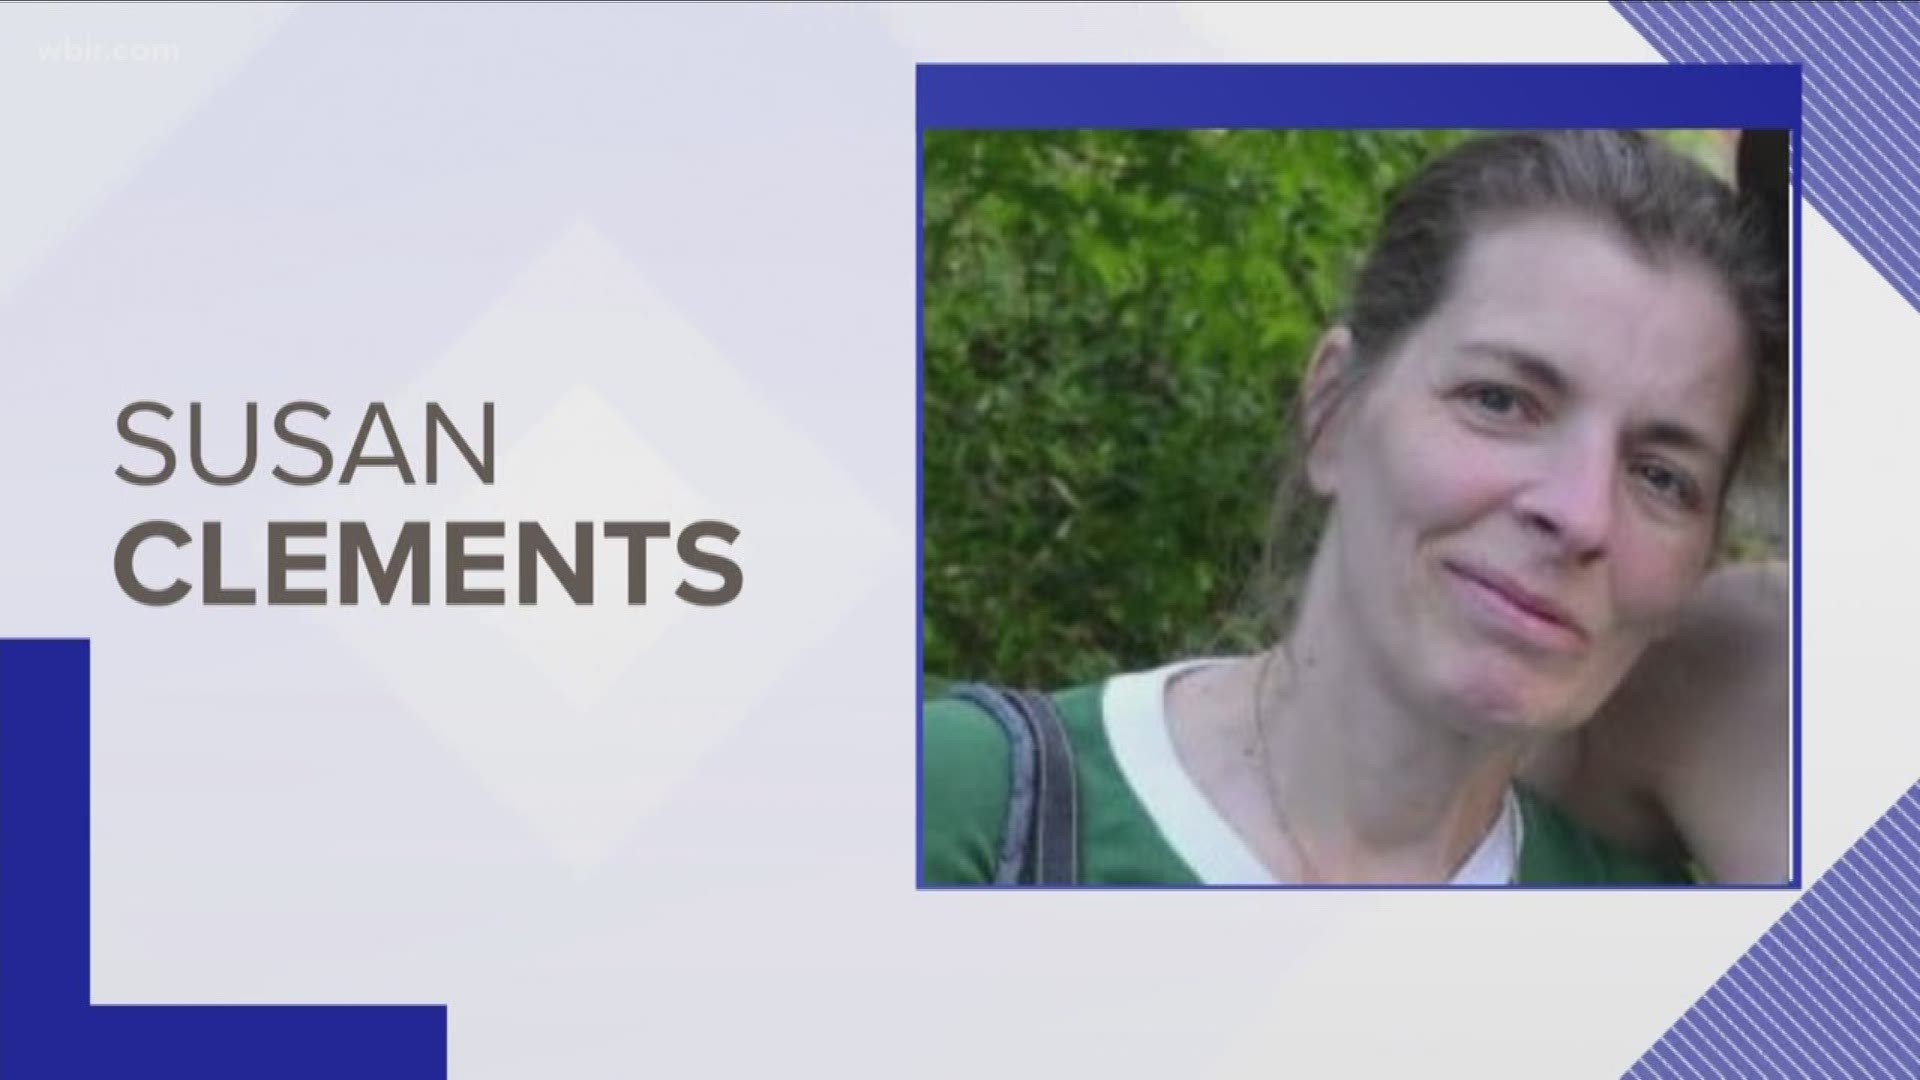 Park leaders say searchers discovered Susan Clements's body after a week long search in the Clingmans Dome area of the park